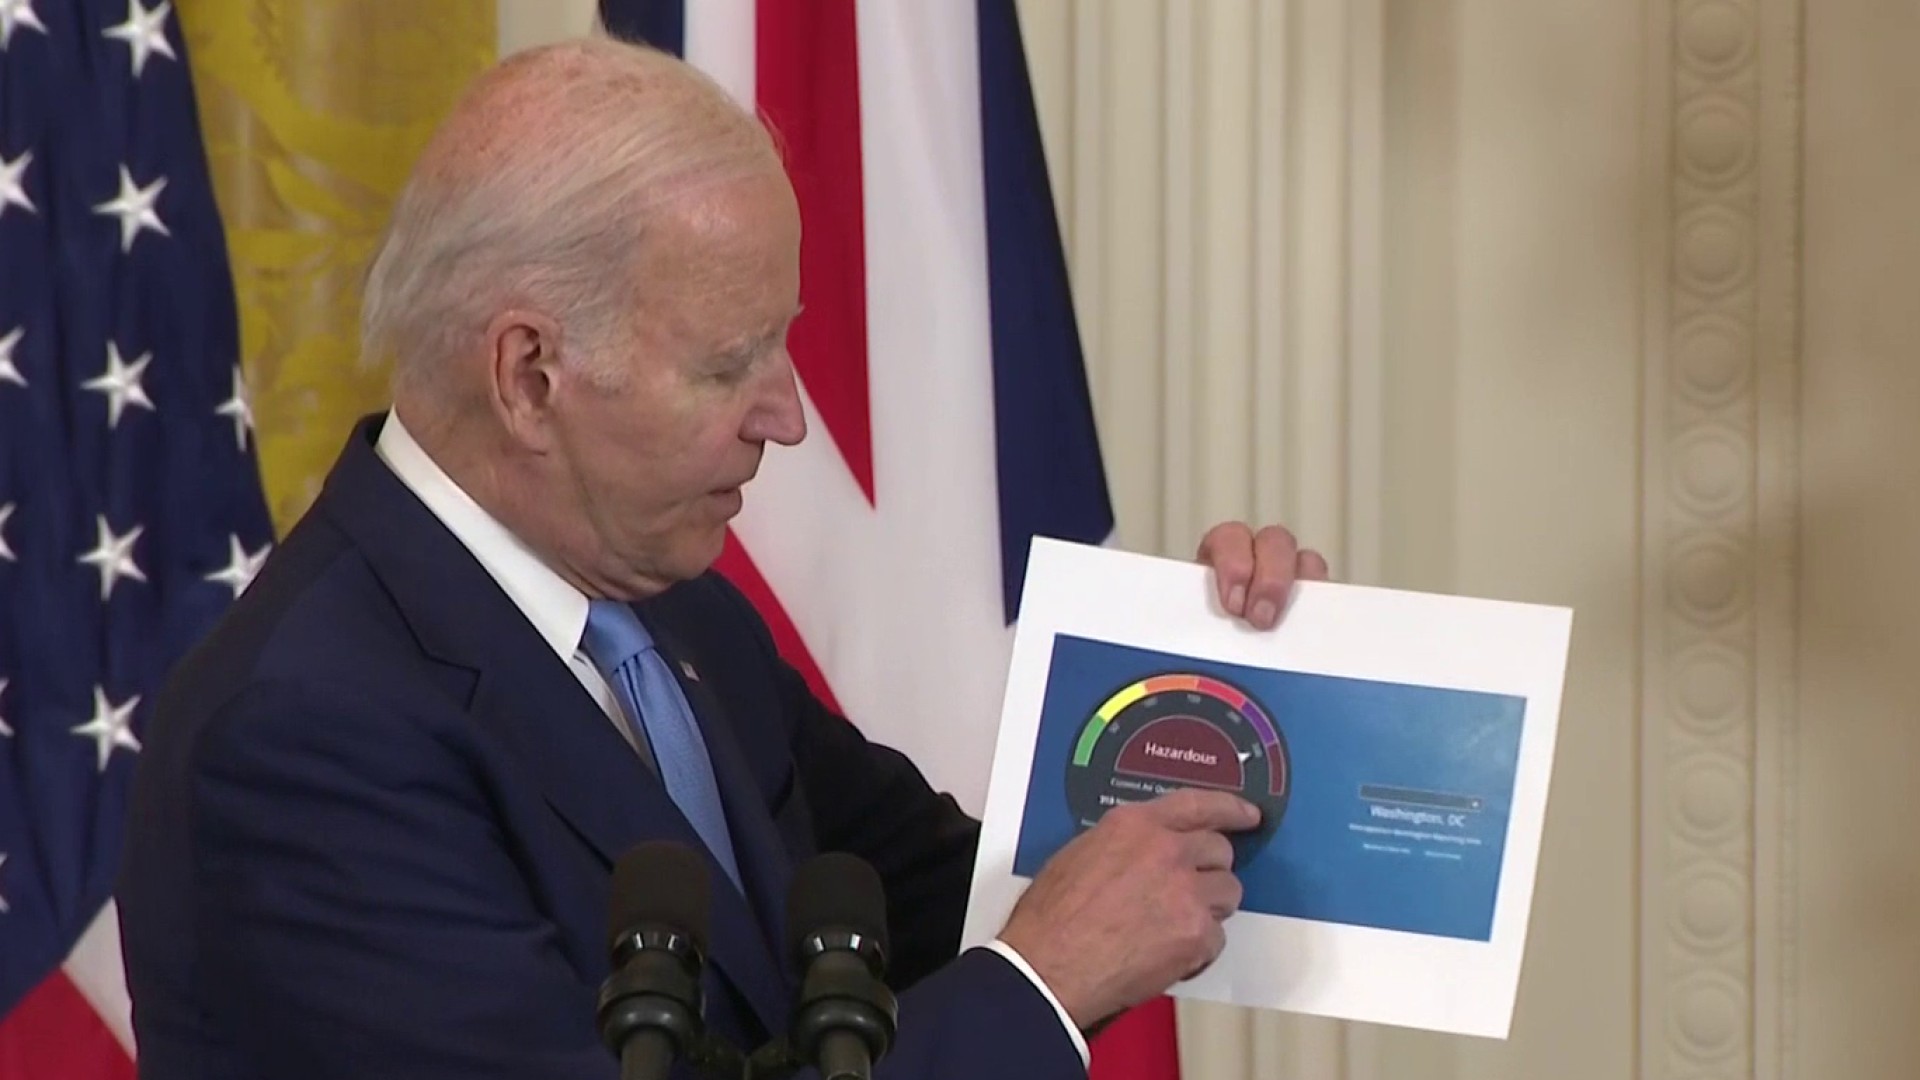 Biden discusses response to Canadian wildfires and smoke